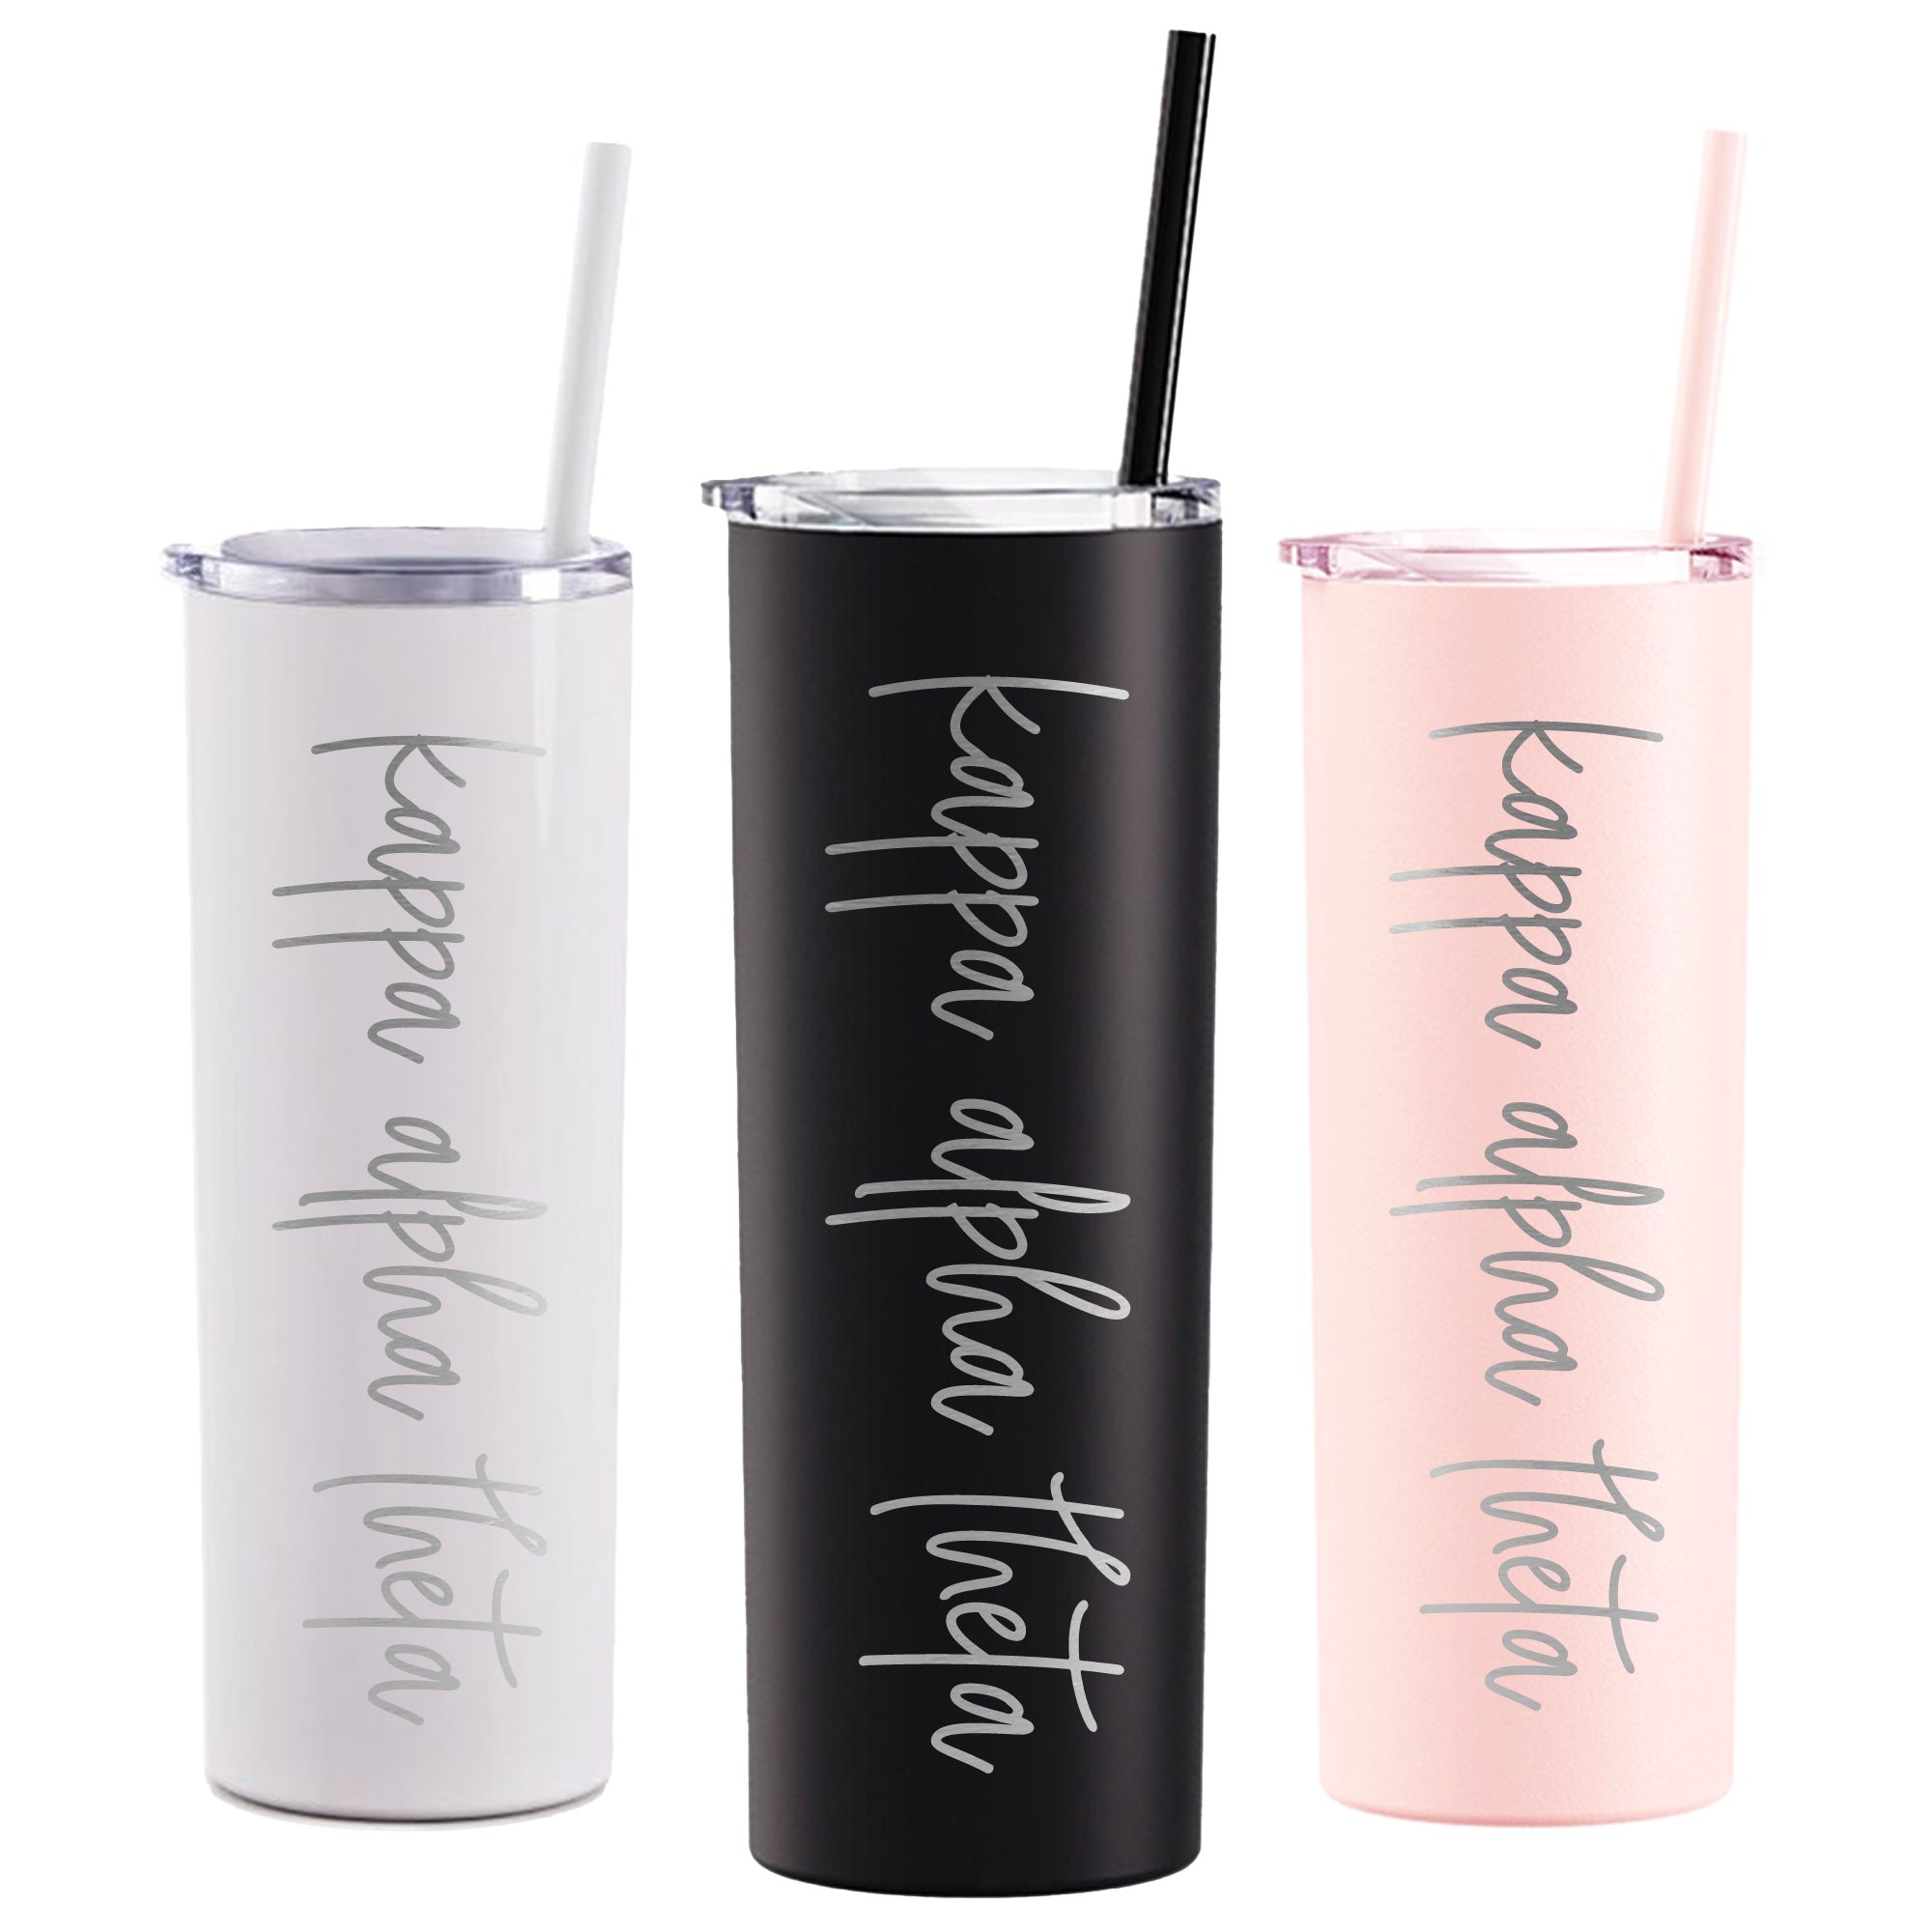 three different colored tumblers with a straw in them